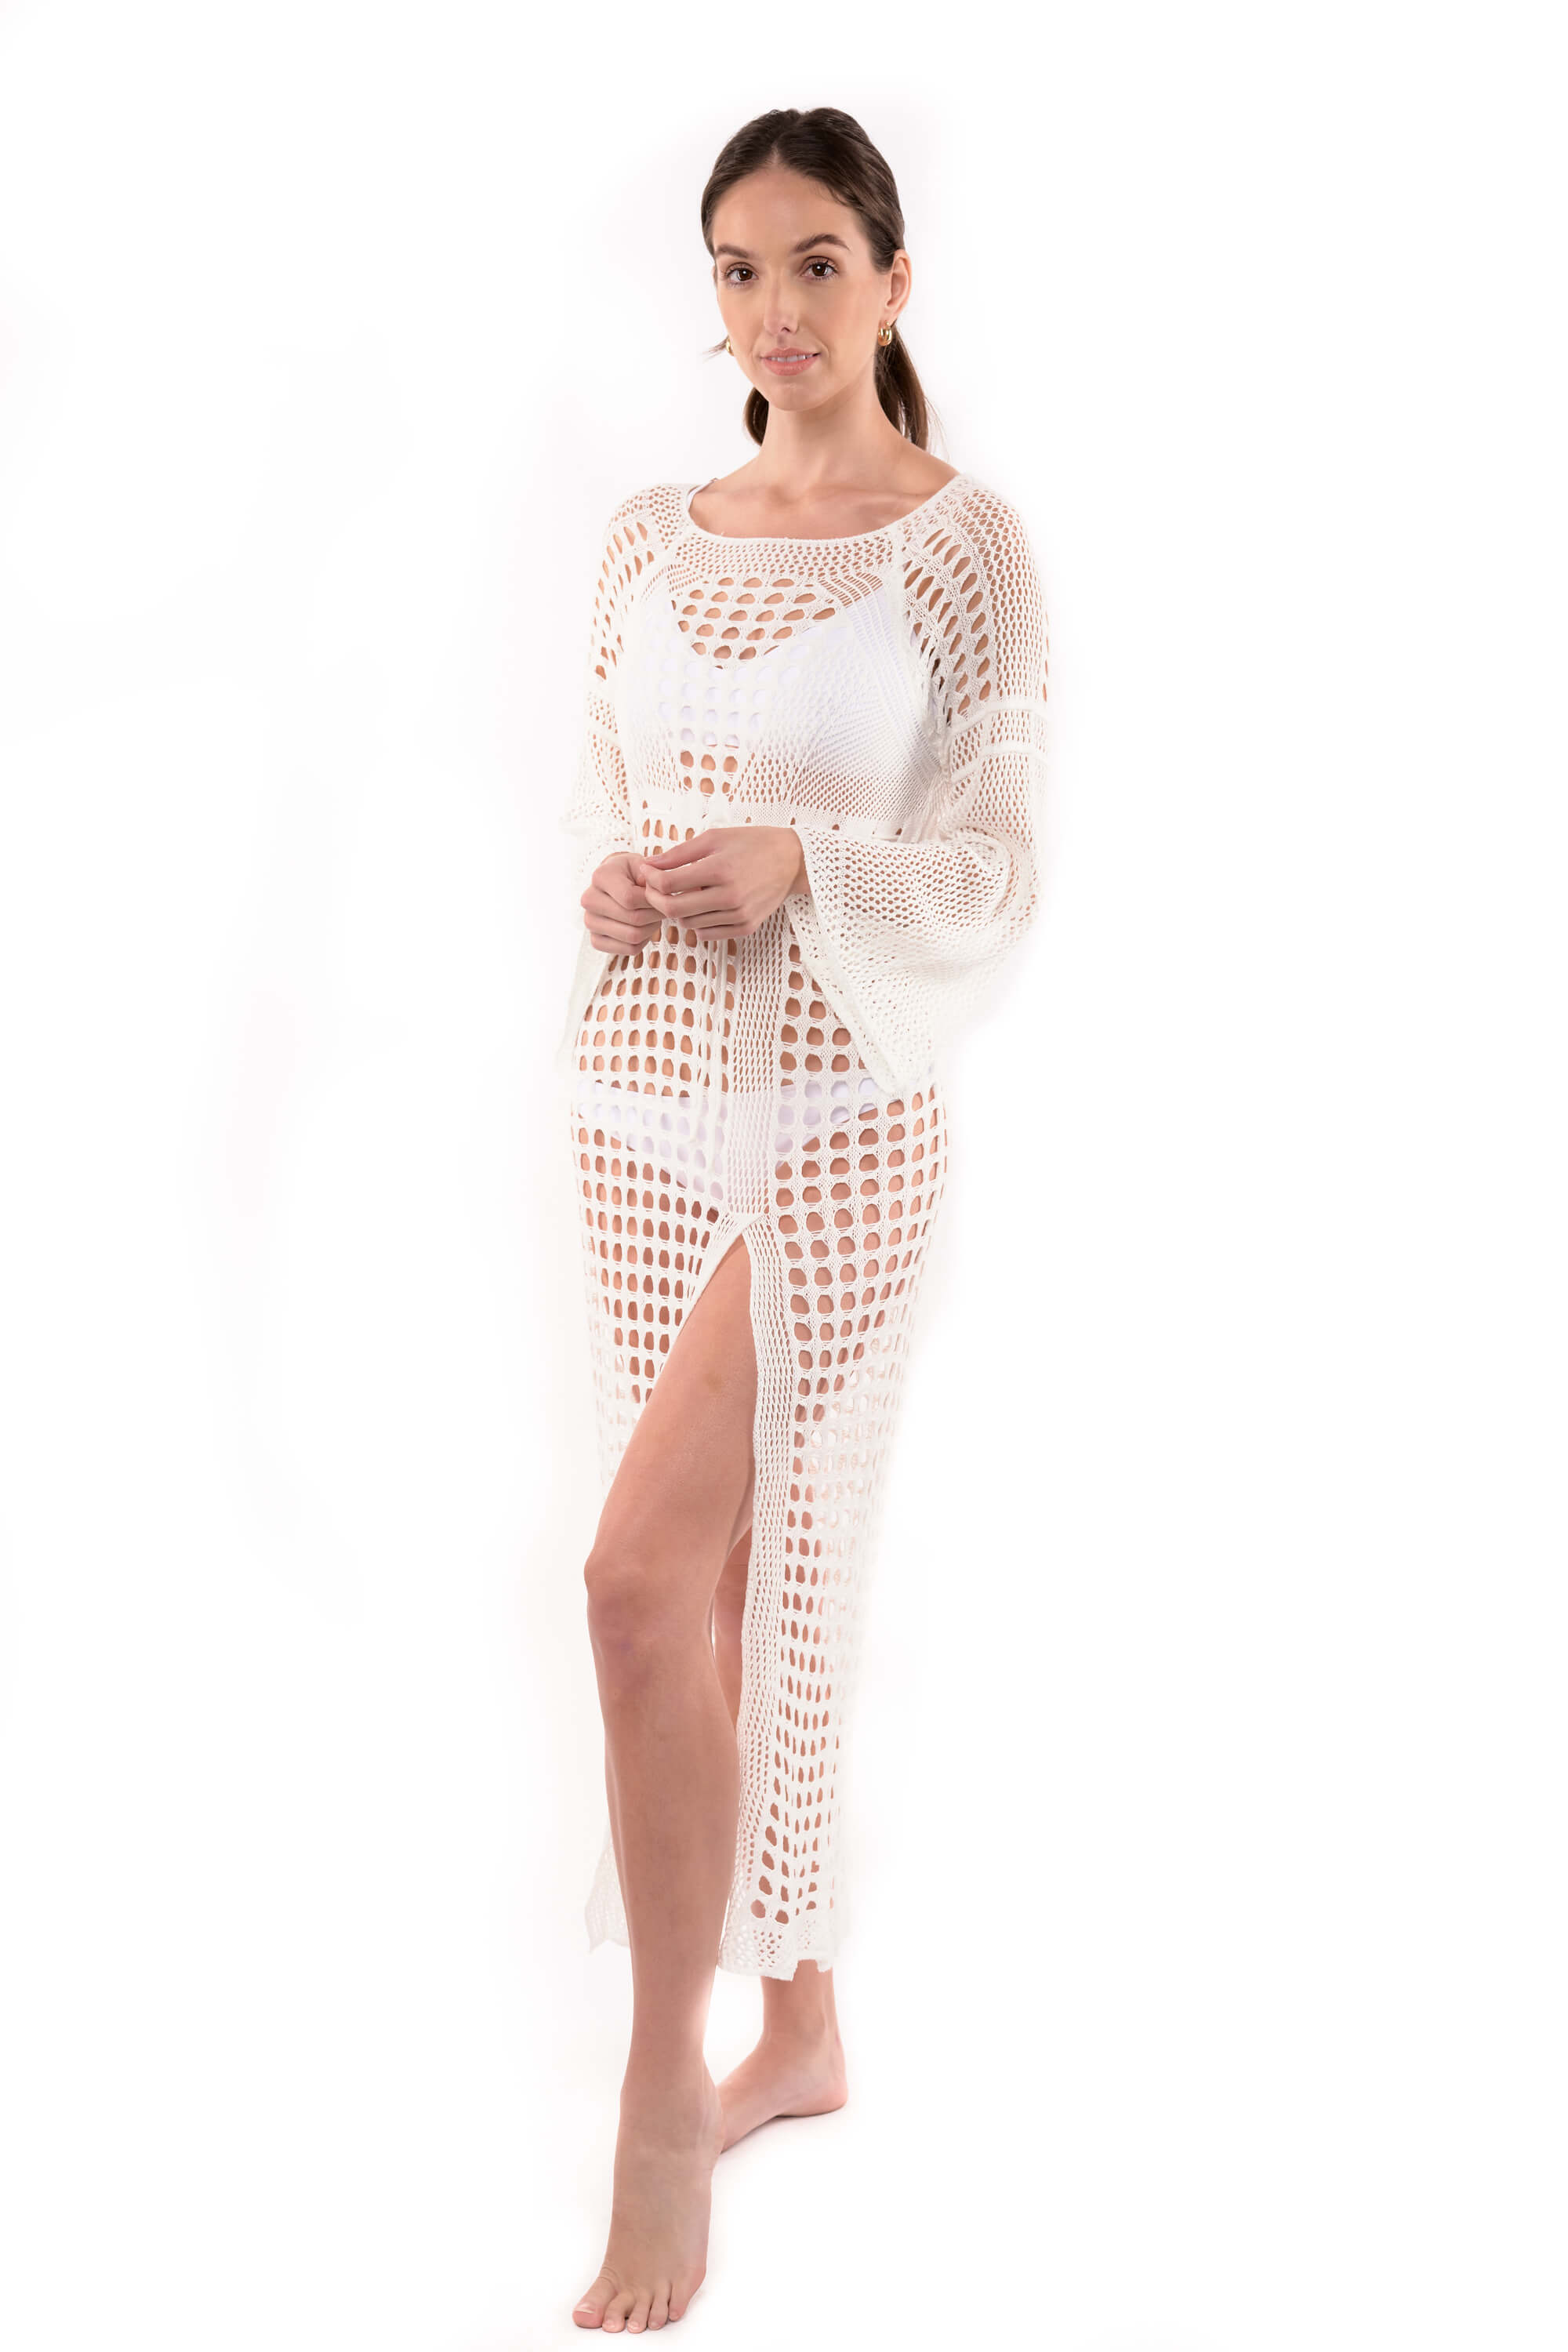 Model wears the Stella crochet cover up in white at the beach